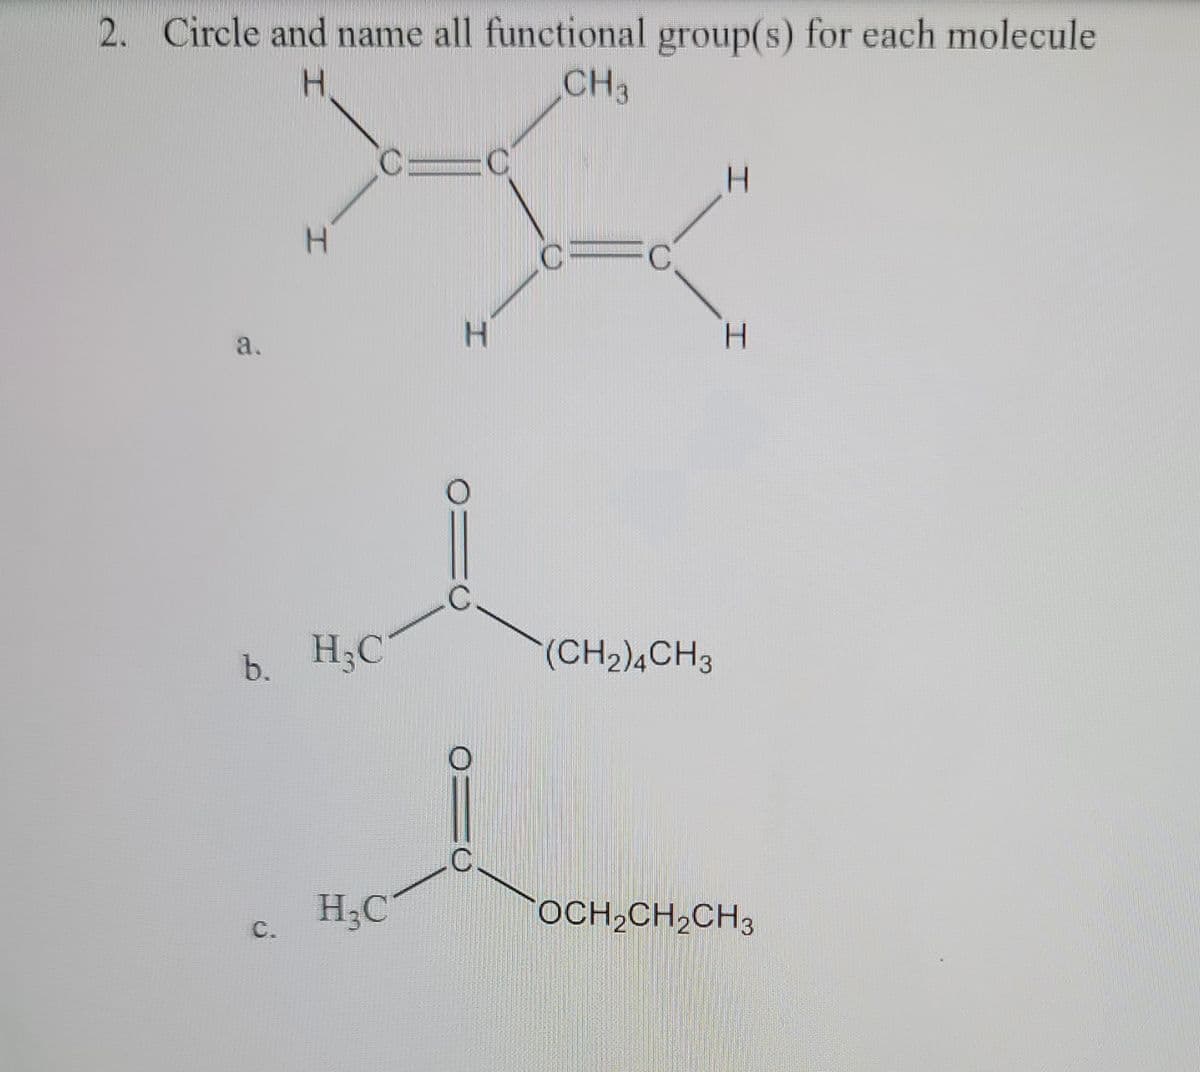 2. Circle and name all functional group(s) for each molecule
H
CH3
a.
b.
C.
H
O
H₂C
H₂C
H
C
C
C
(CH₂)4CH3
H
H
OCH₂CH₂CH3